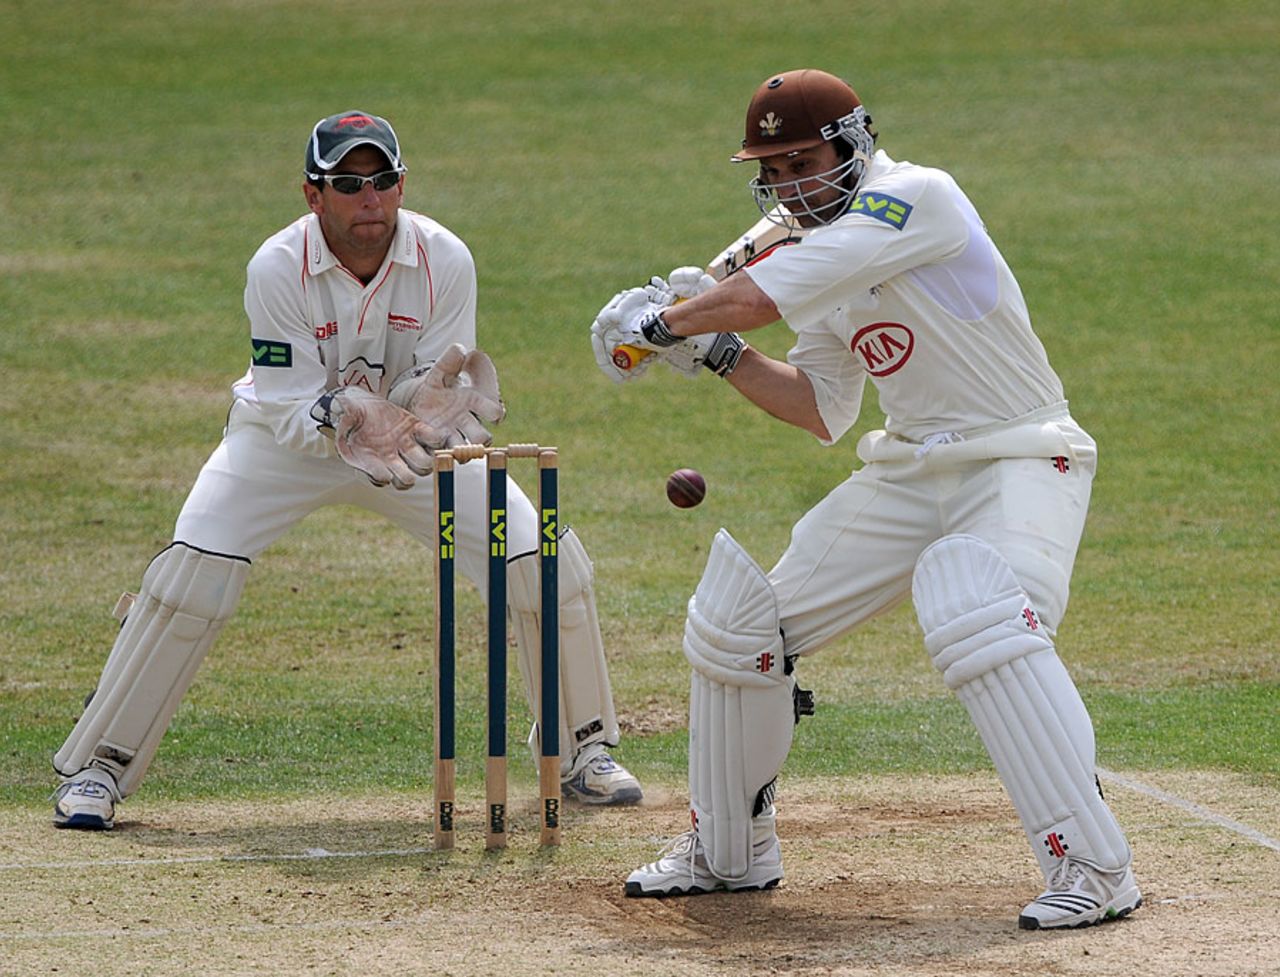 Mark Ramprakash made 91 to set up Surrey's declaration, Surrey v Leicestershire, County Championship, Division Two, The Oval, May 6, 2011